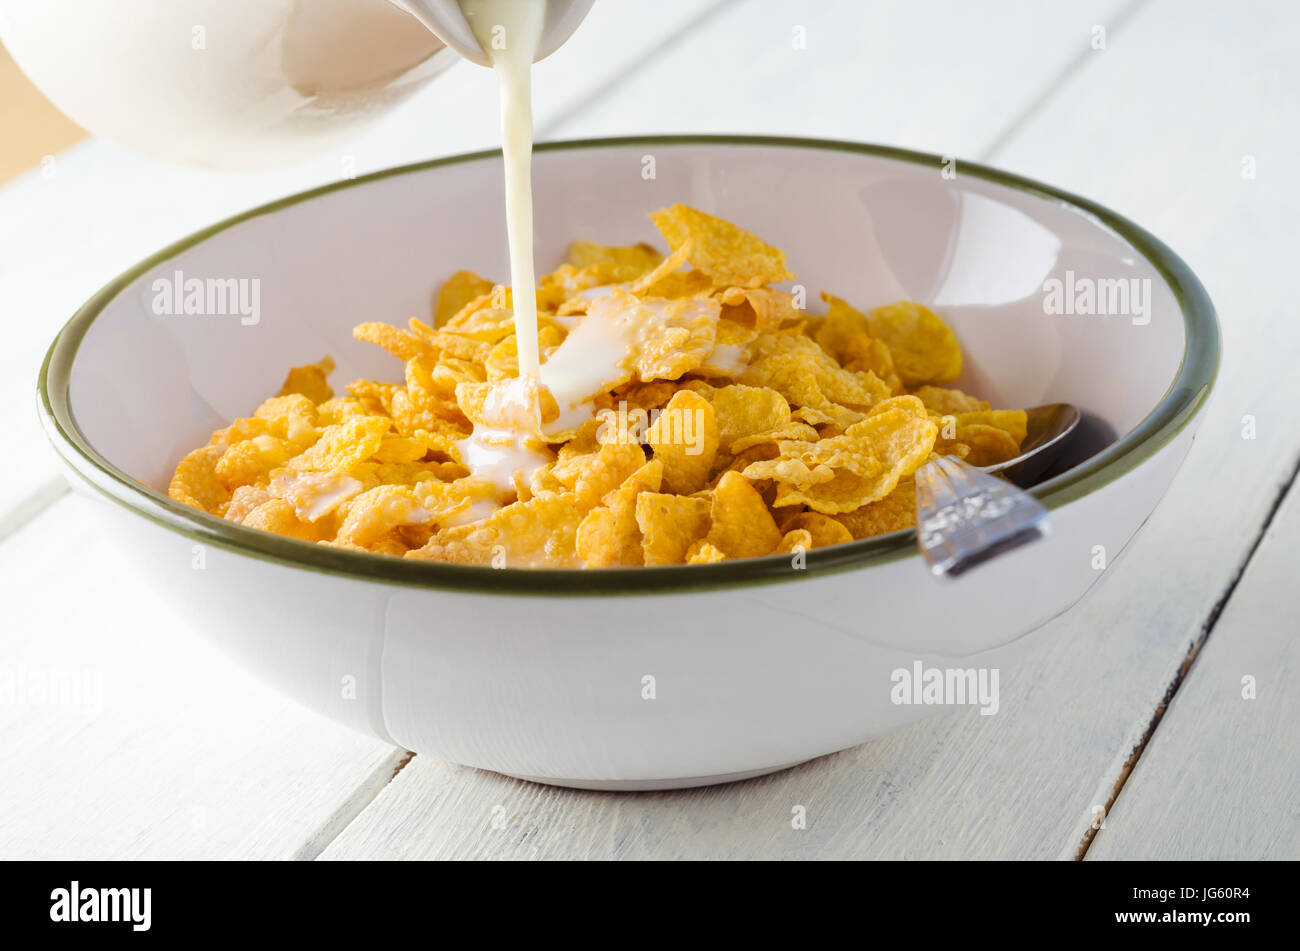 Pouring Milk Into Bowl Of Cereal Stock Photo - Download Image Now